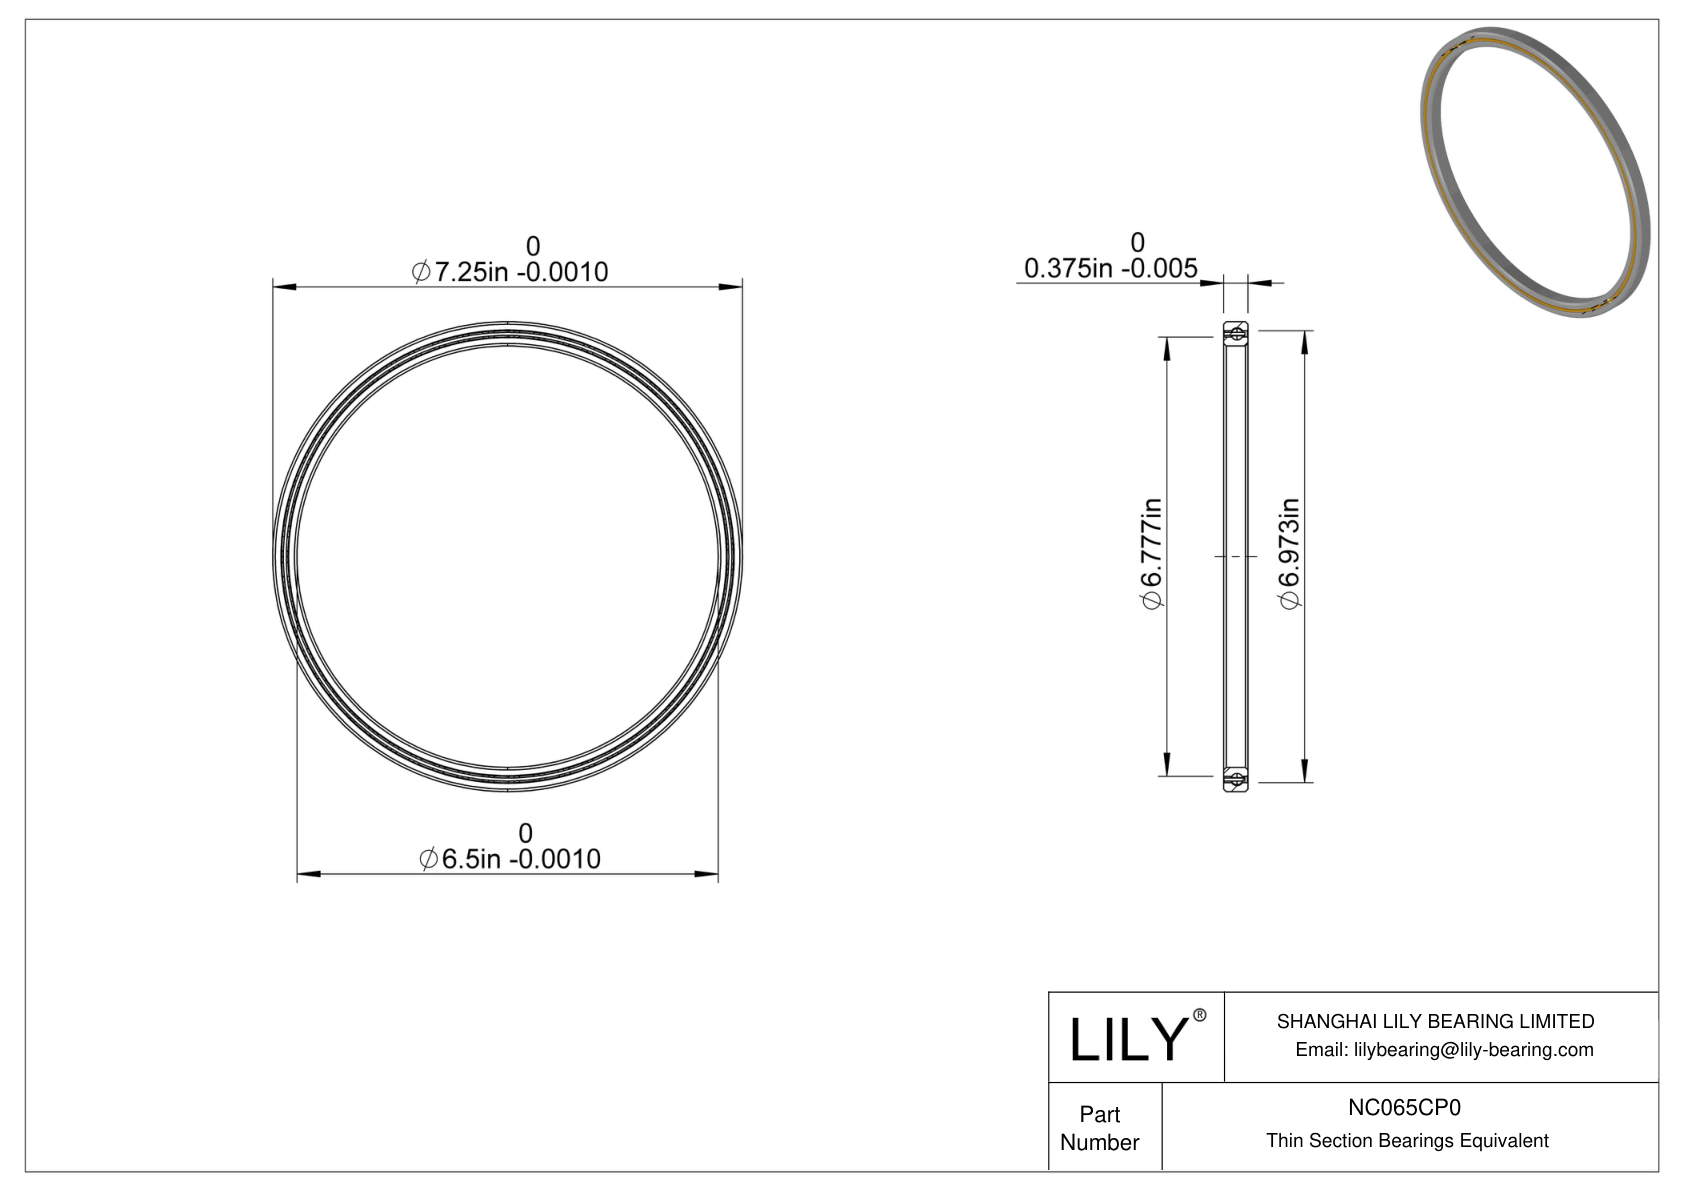 NC065CP0 Constant Section (CS) Bearings cad drawing